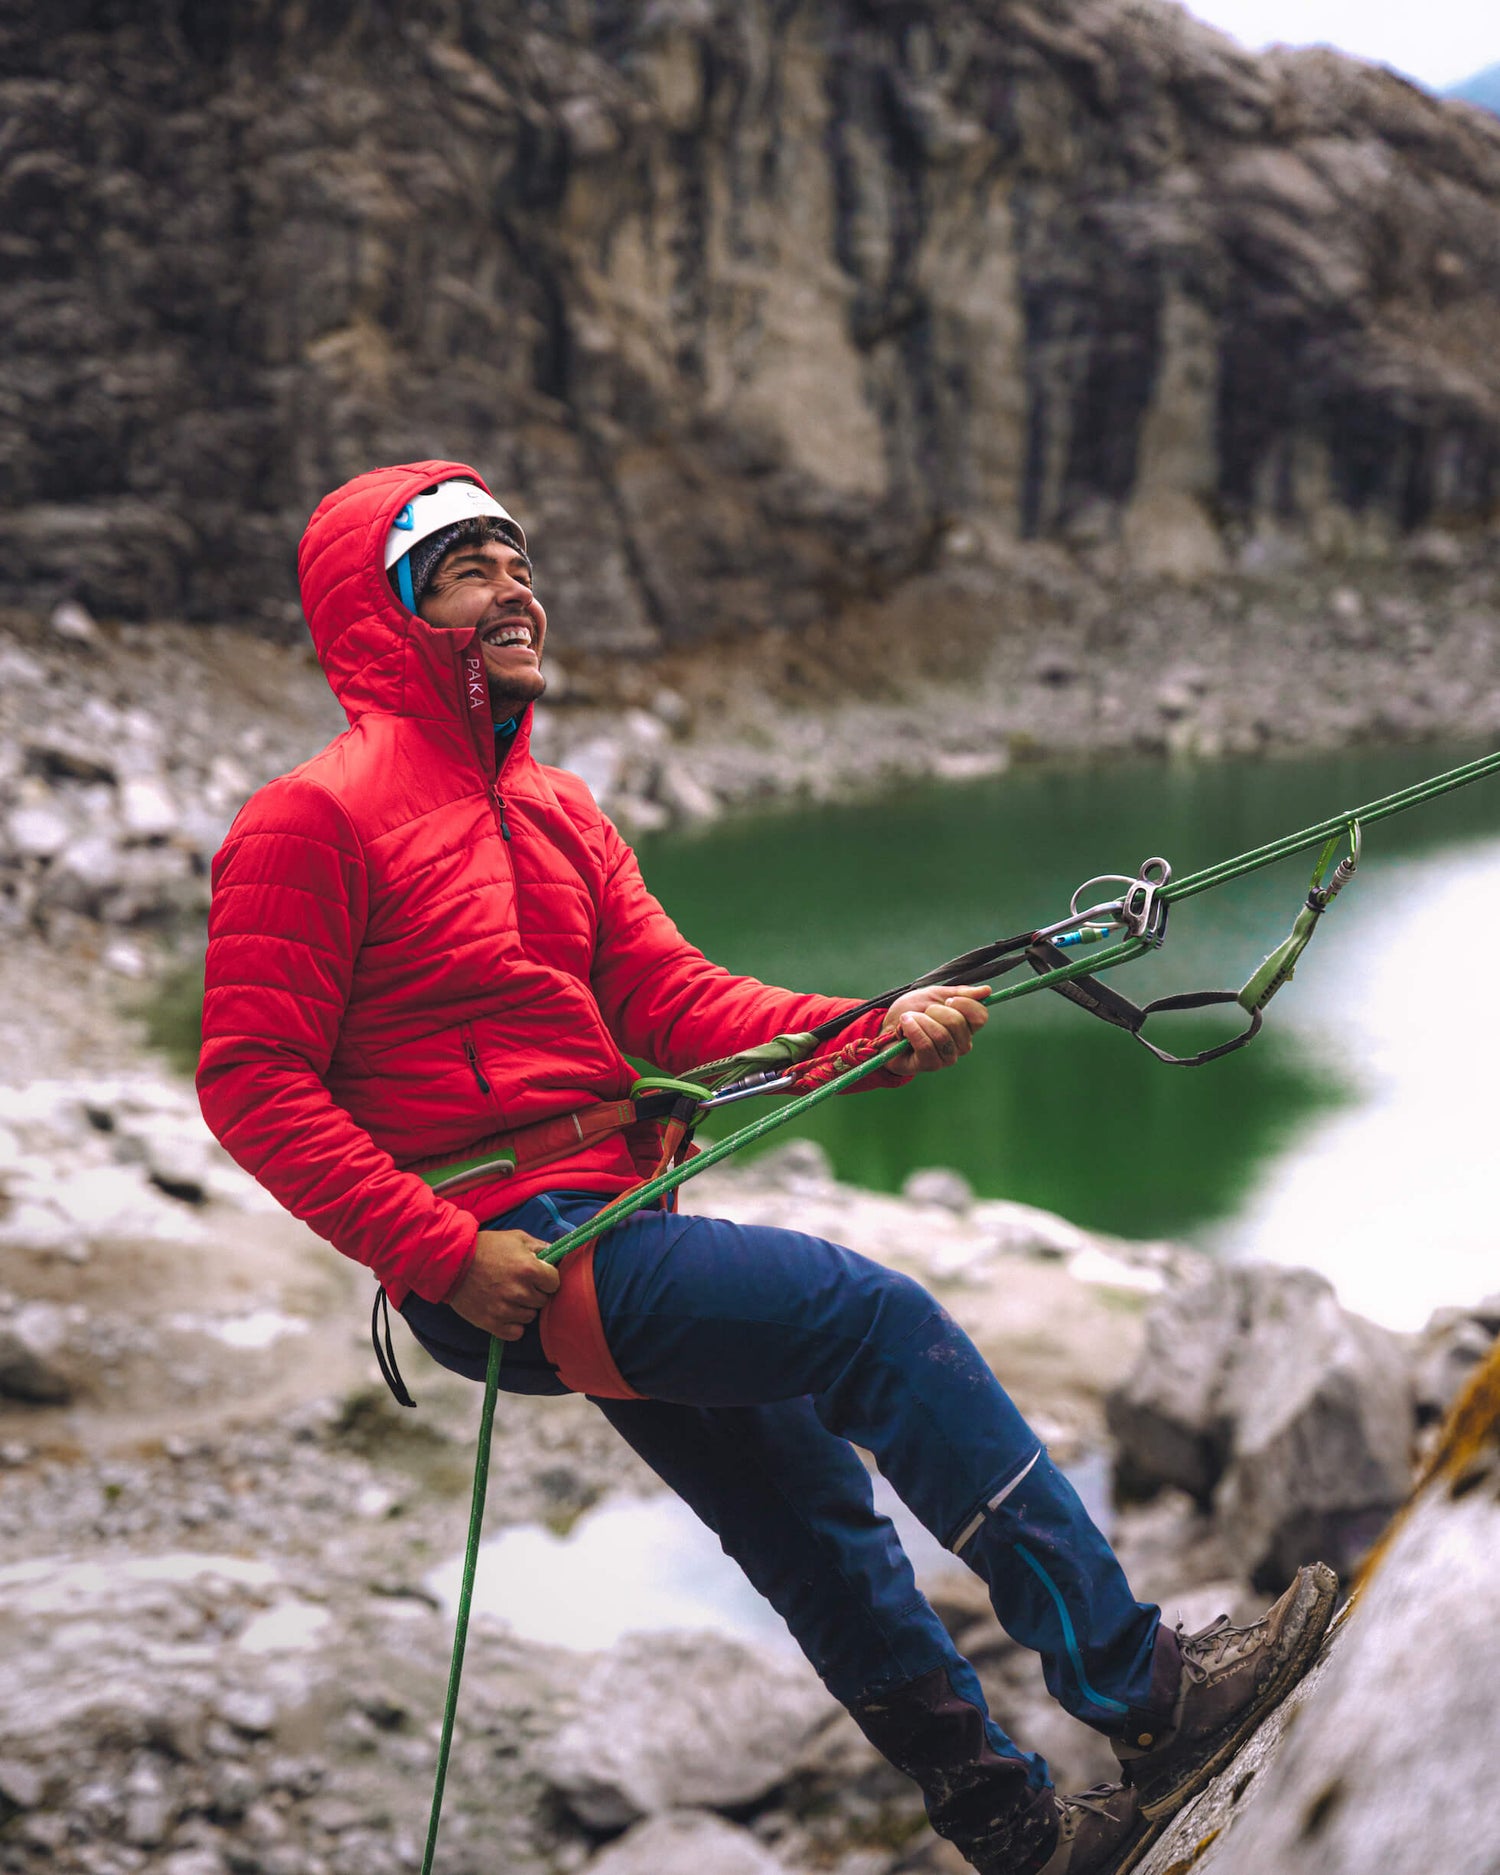 Man smiling while repelling from mountain in red winter jacket